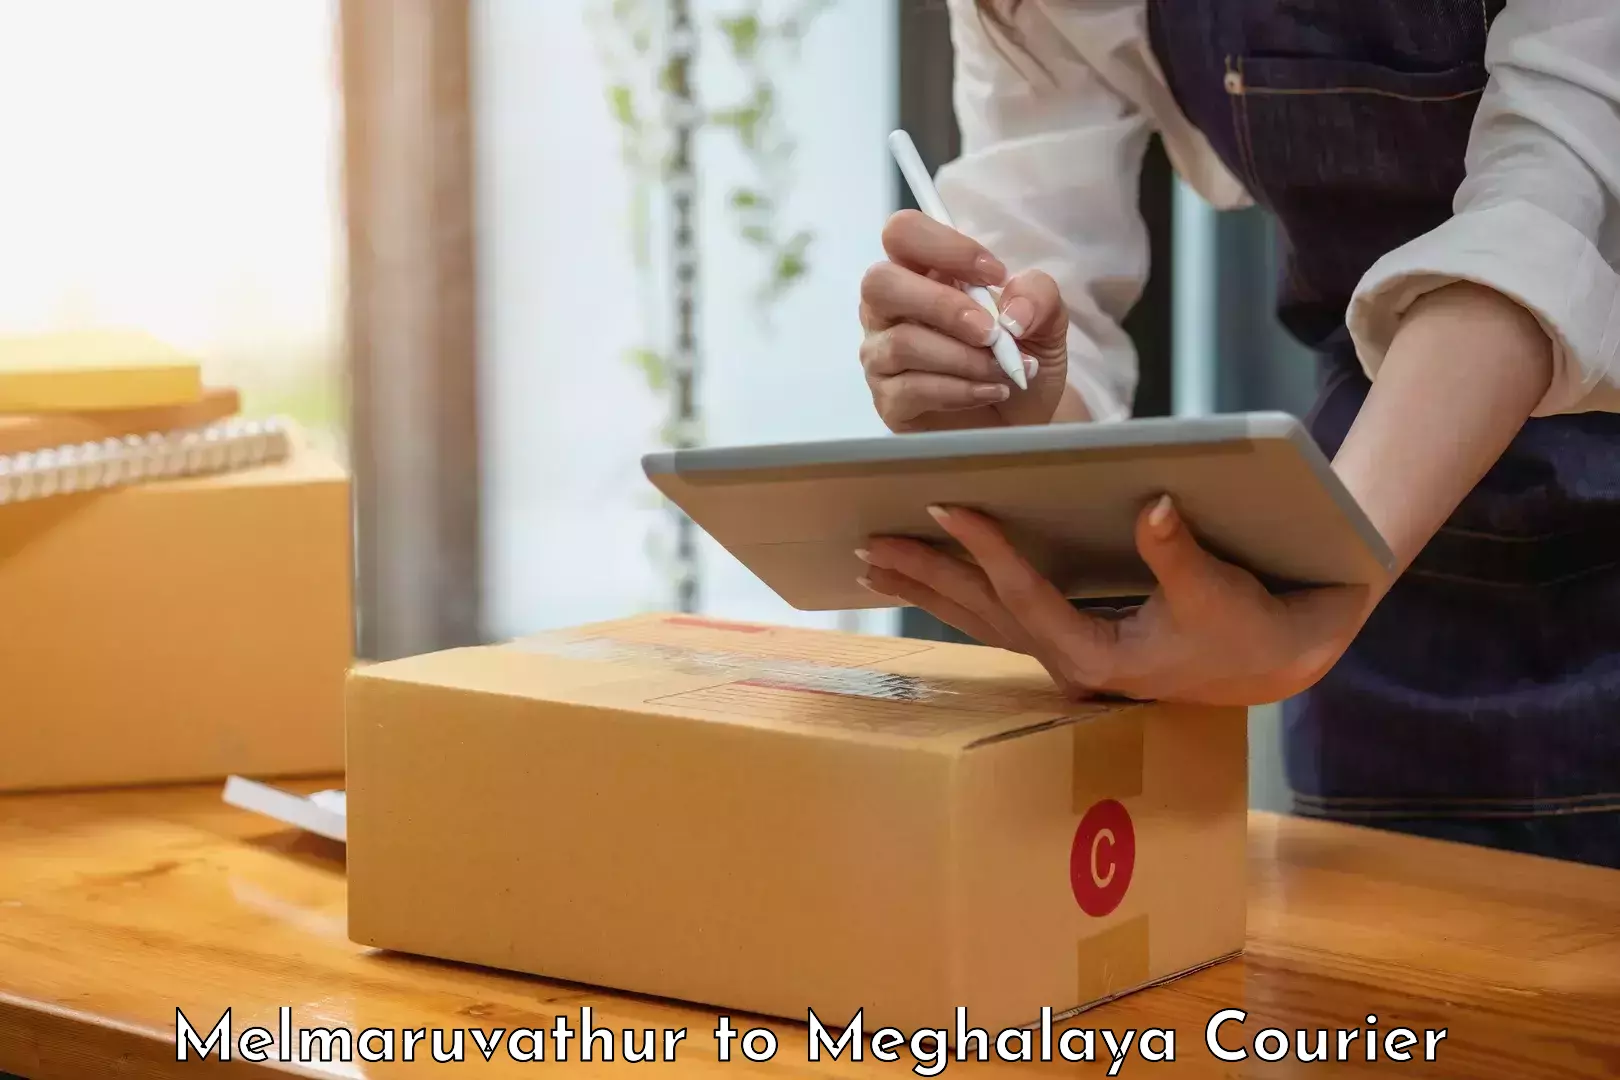 State-of-the-art courier technology Melmaruvathur to Shillong